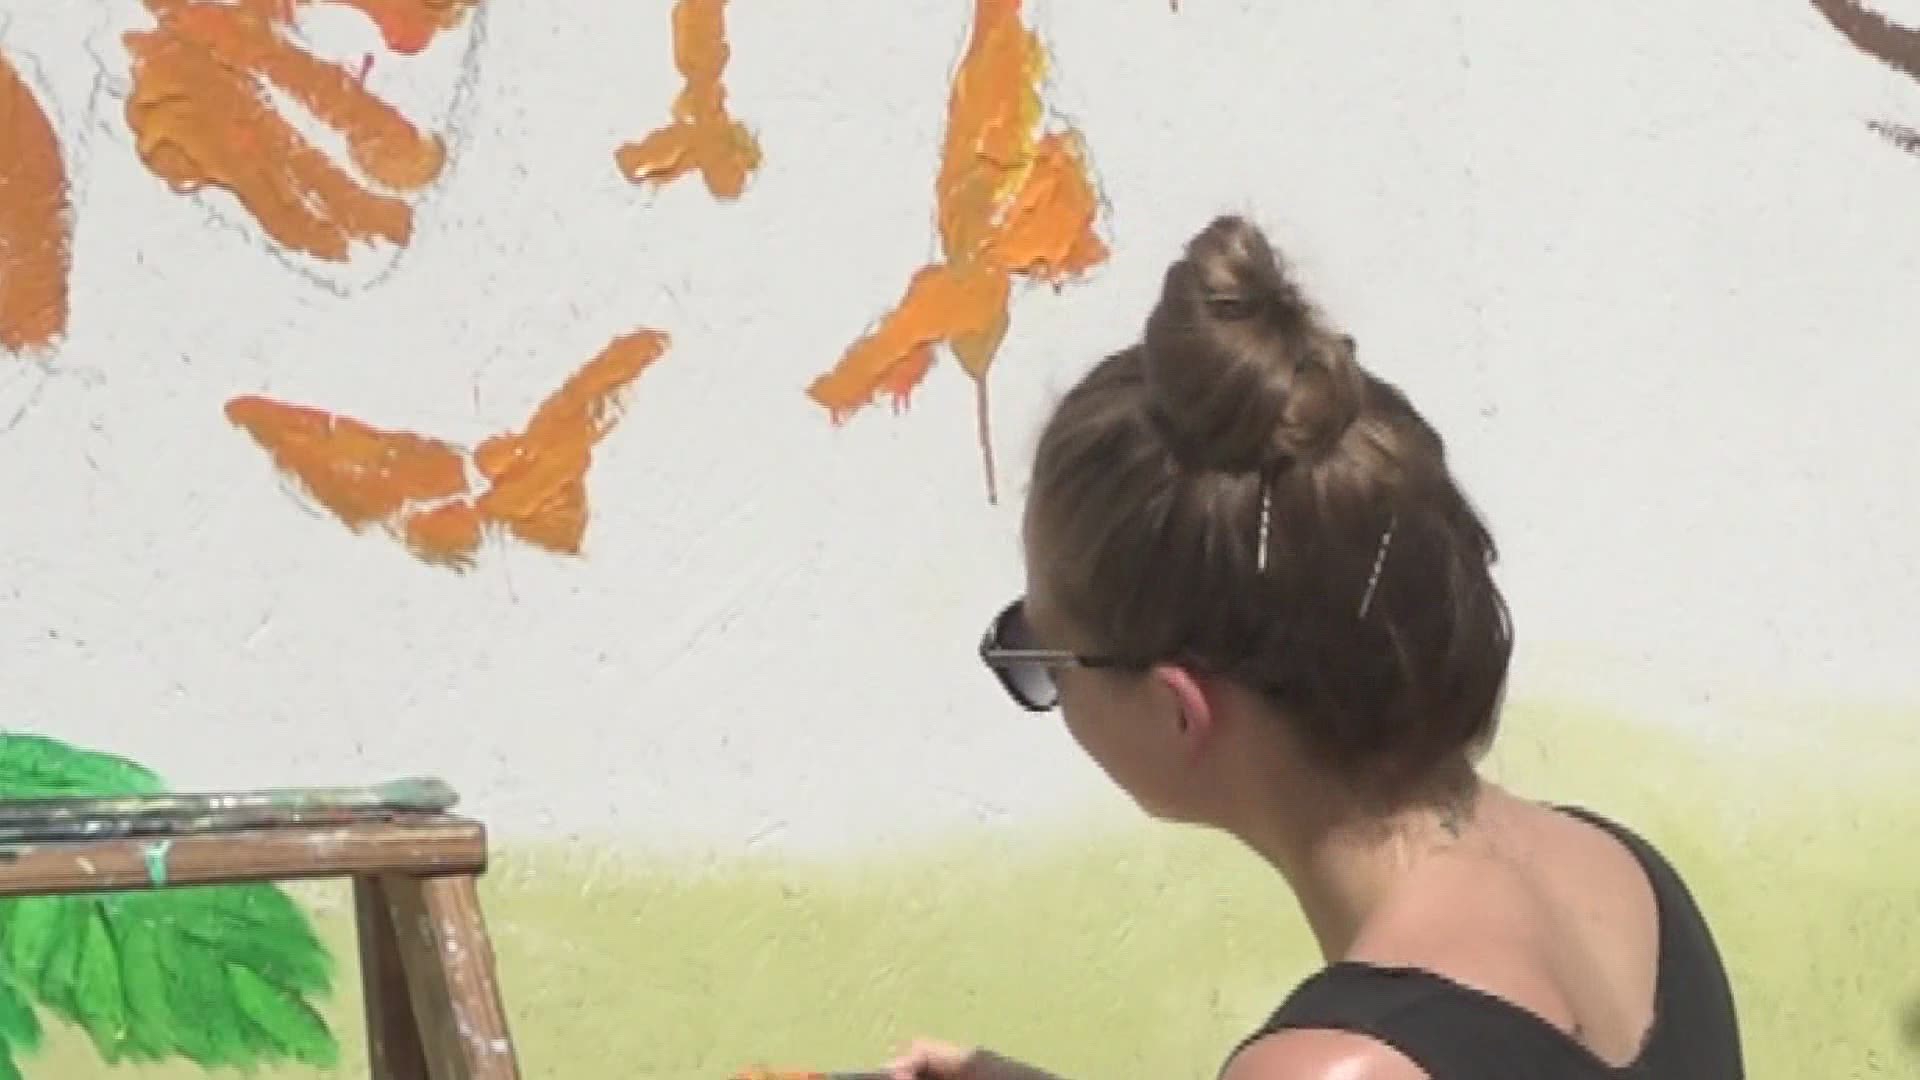 Boarded up windows on business downtown are being transformed into murals.